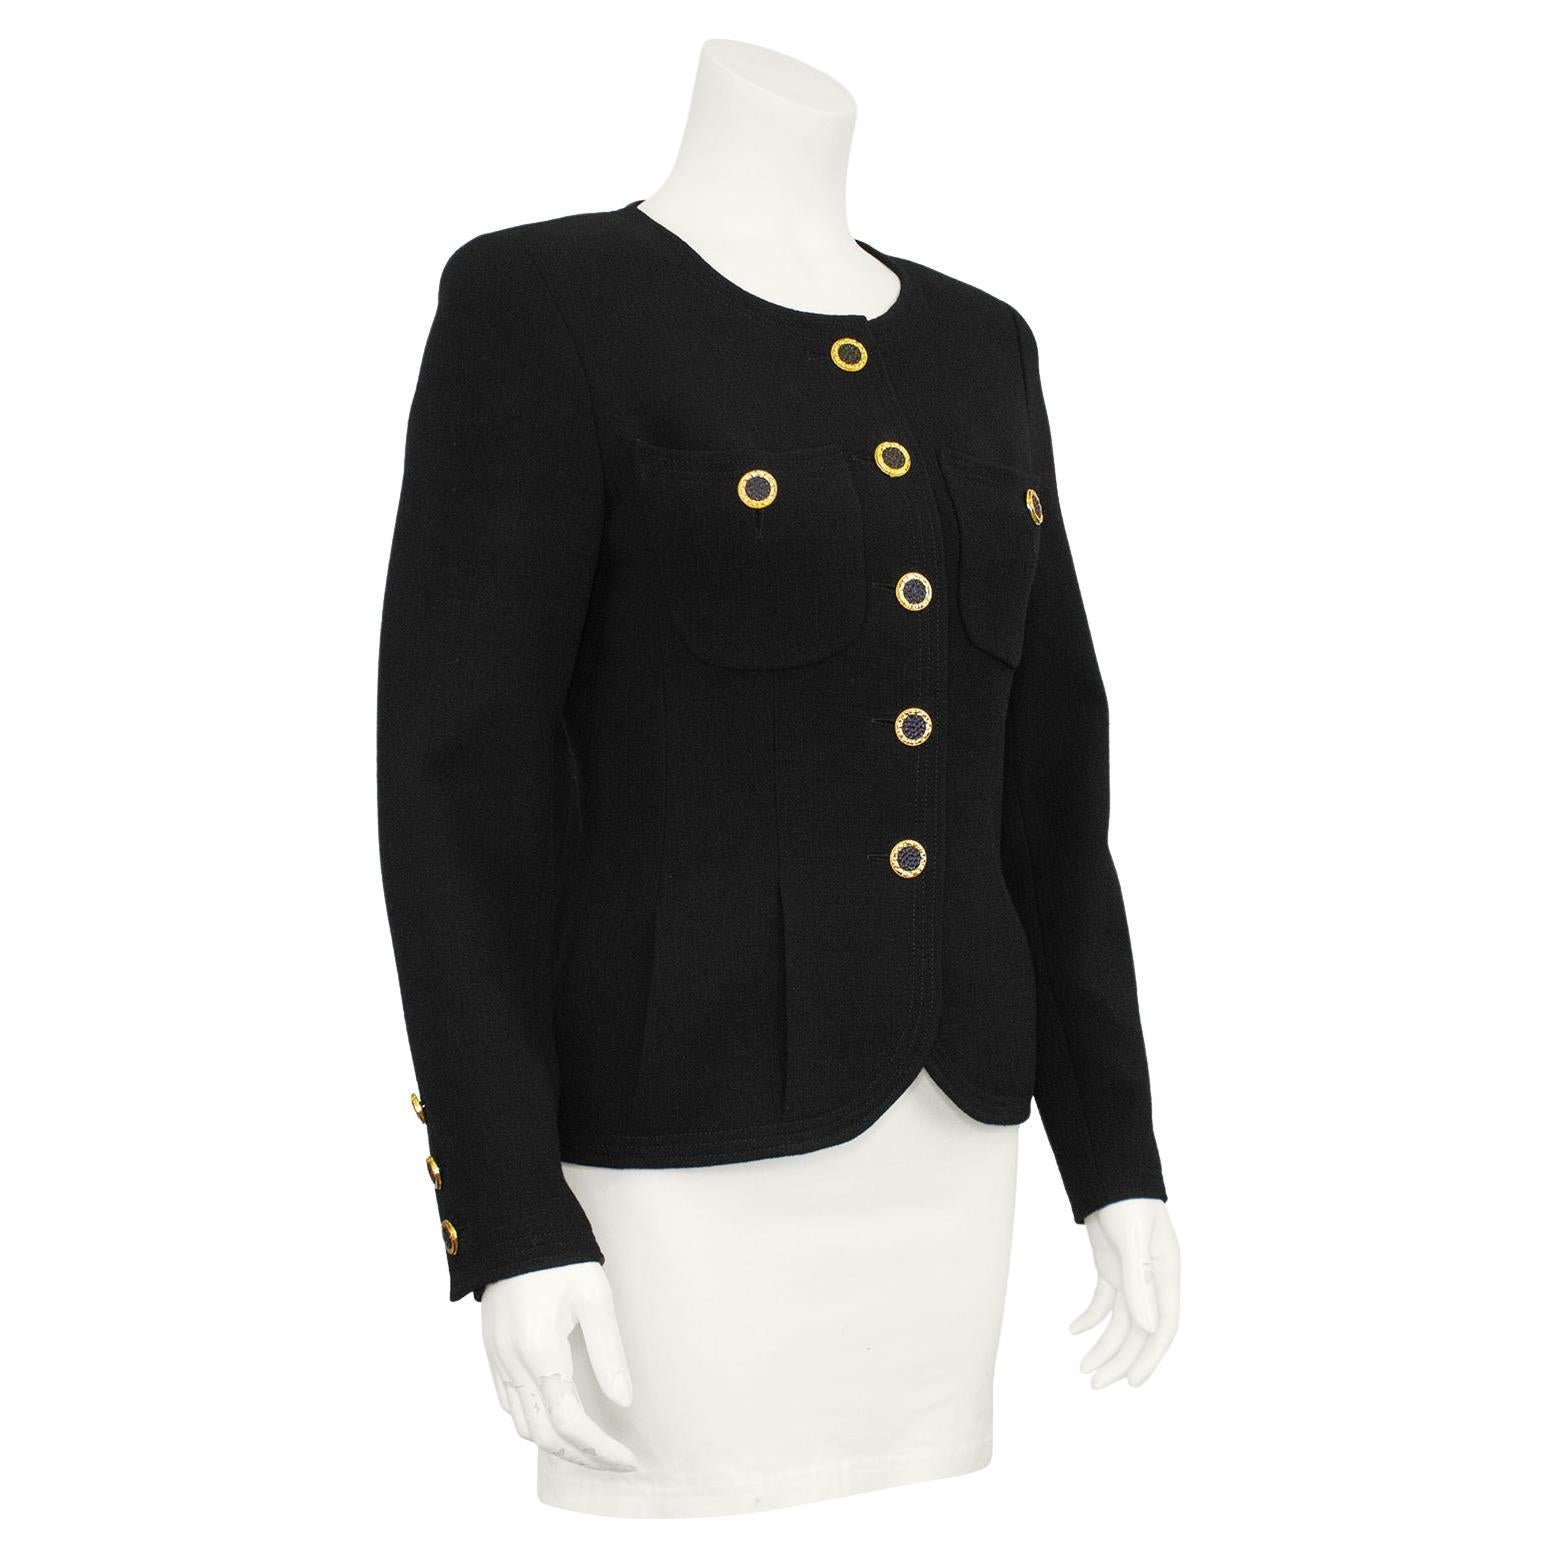 Lovely textured black crepe Chanel jacket from the 1990s. Collarless with contrasting gold tone and black buttons and two patch pockets at the bust. The beautiful seam work throughout and inverted pleats at the hips make this jacket very flattering